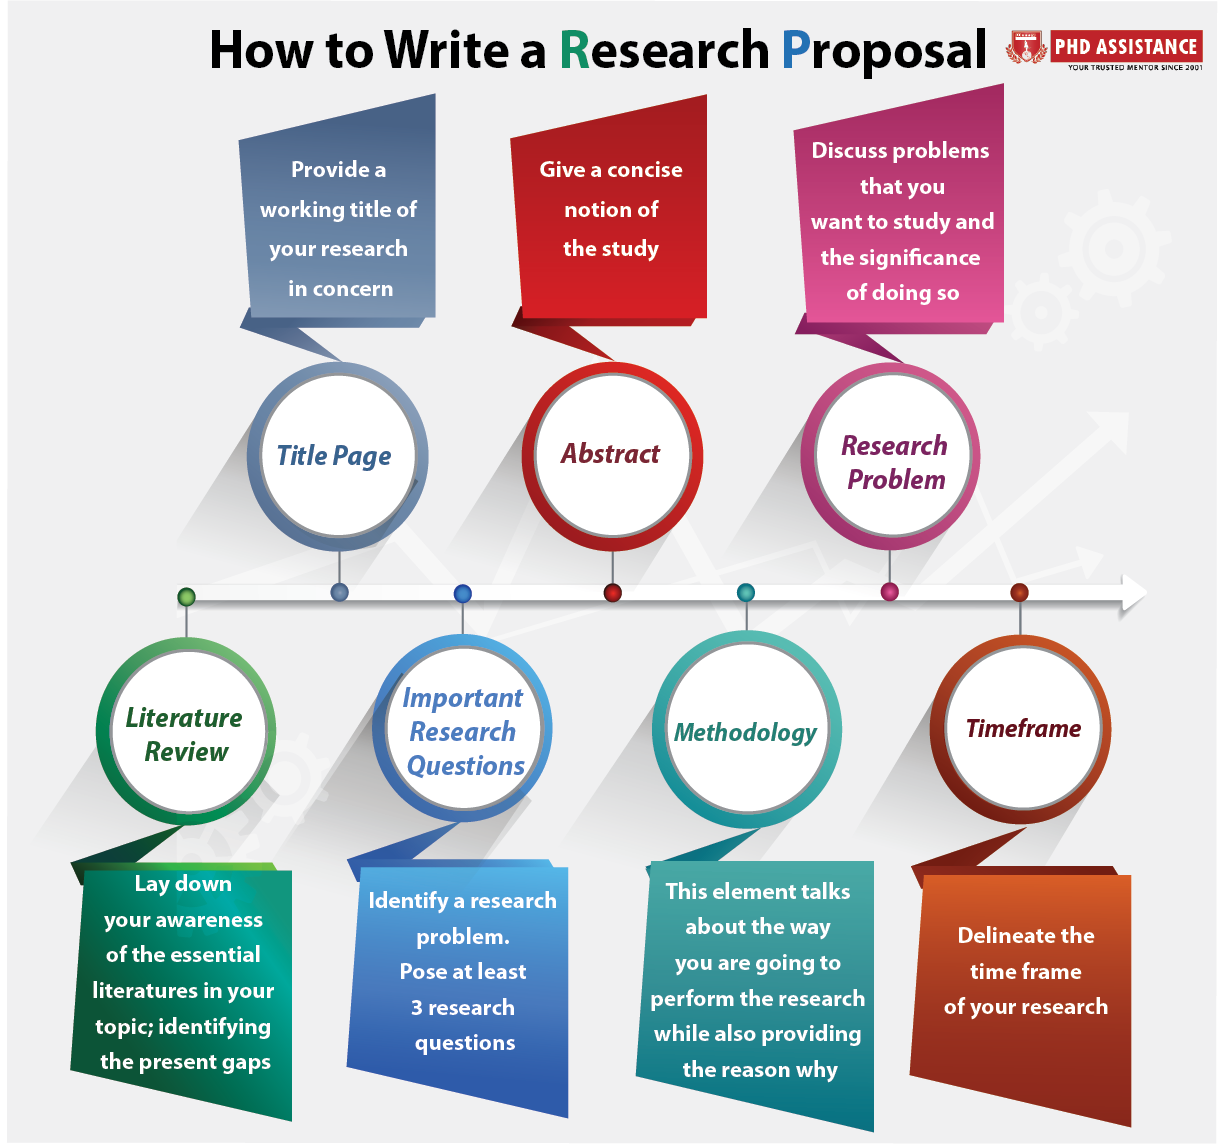 How to write a PhD research proposal on Business Management